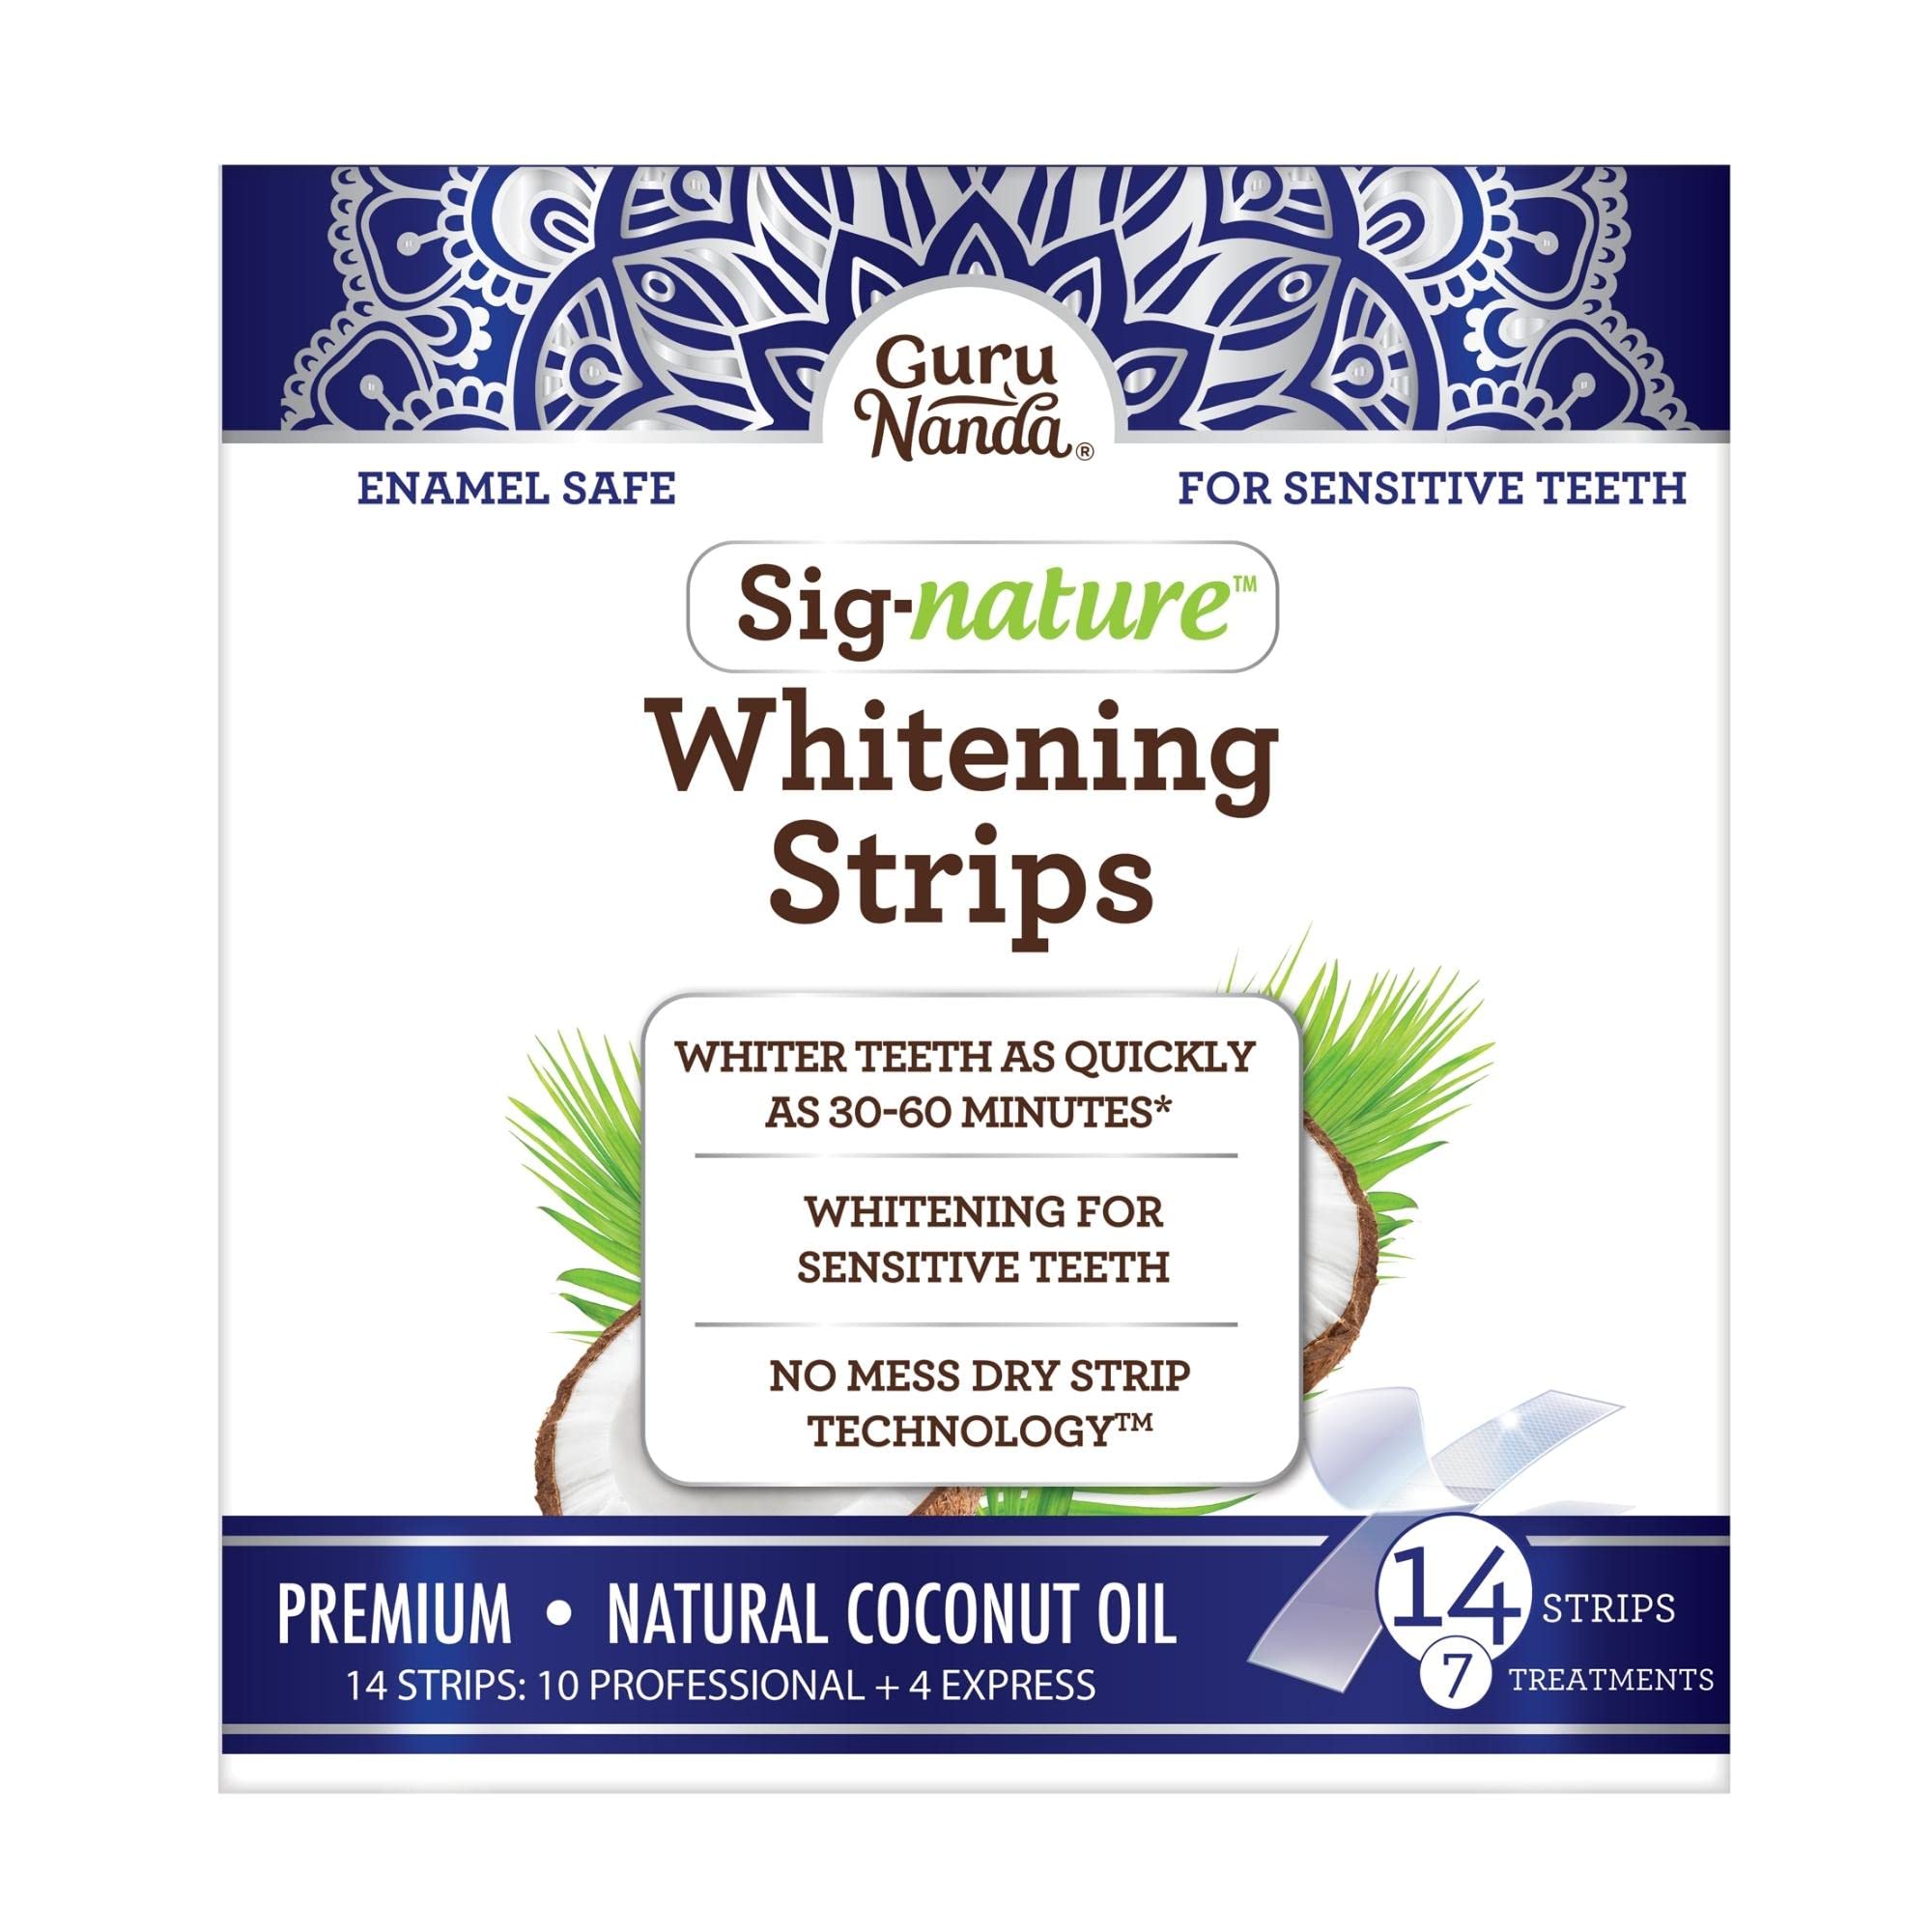 GuruNanda Teeth Whitening Strips with Coconut Oil - 14 Enamel Safe Strips for Sensitive Teeth - Non-Slip, Dry Strip Technology for Whiter Teeth - 7 Professional Treatments with 30 Minutes Fast Results